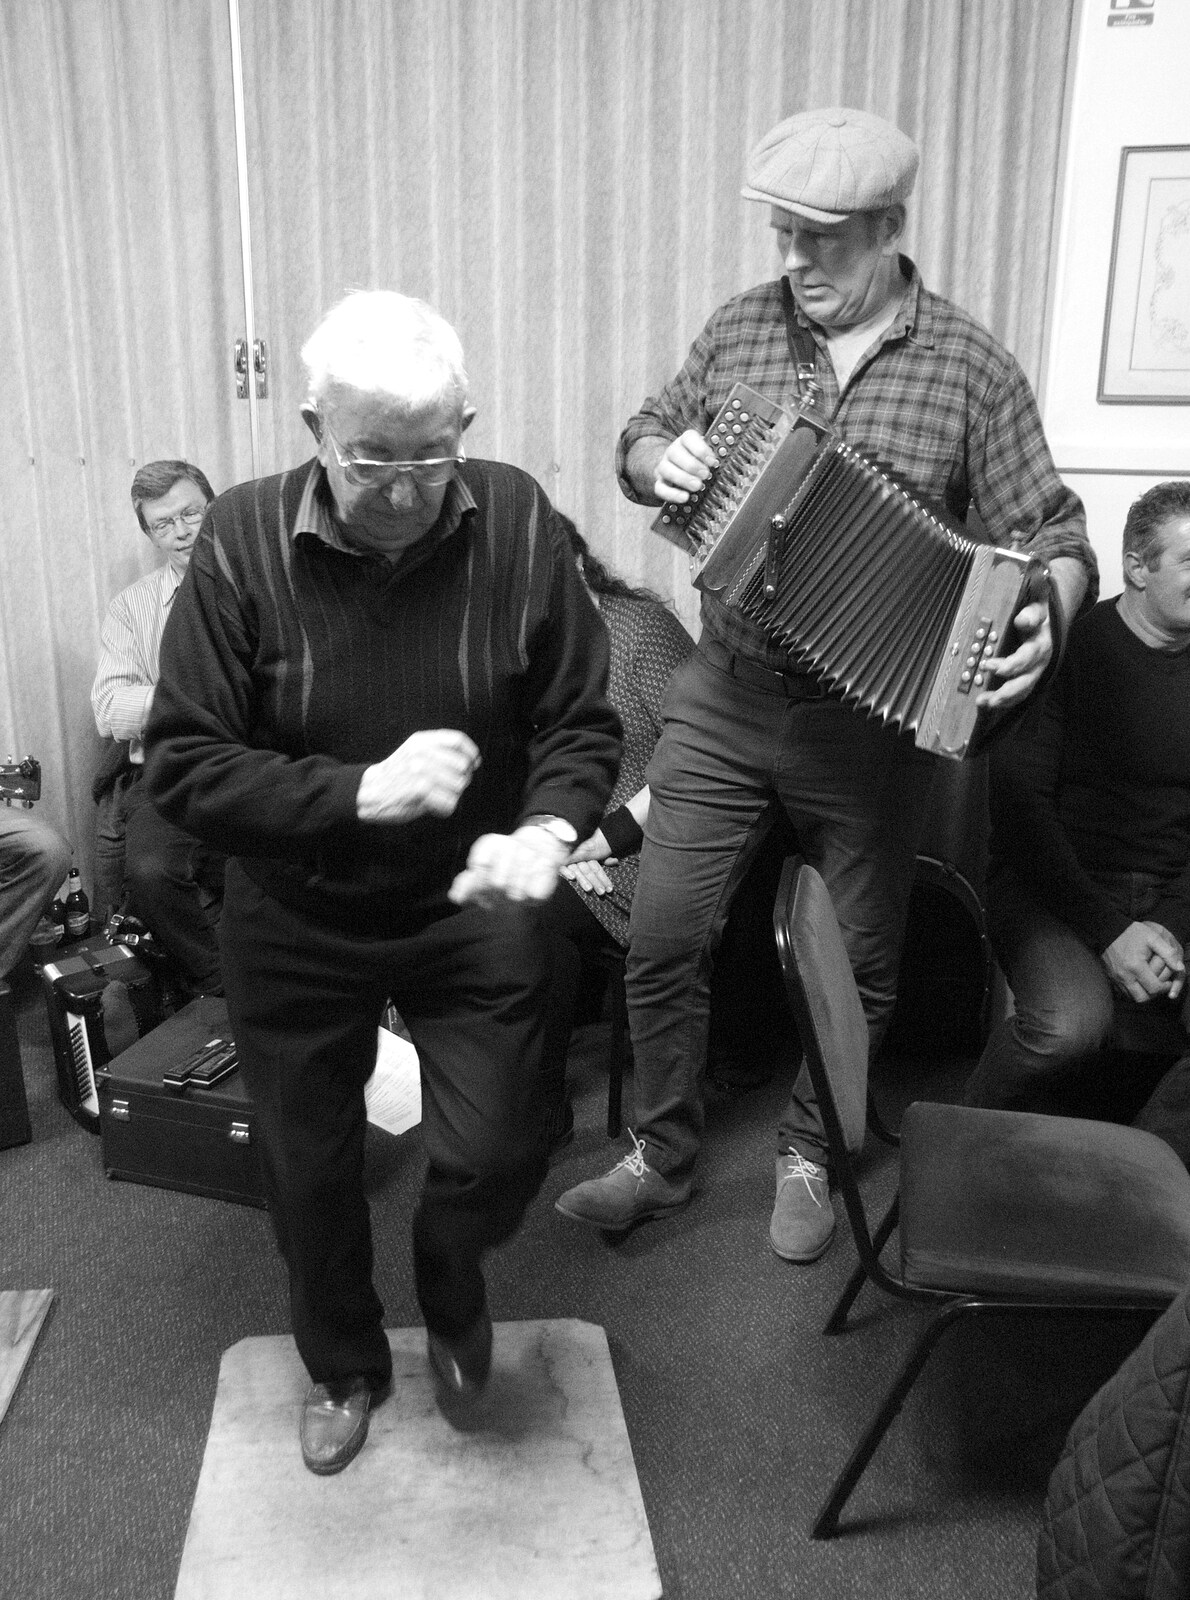 Big Steve does a session on accordion from St. Patrick's Day at the Village Hall, Brome, Suffolk - 16th March 2018